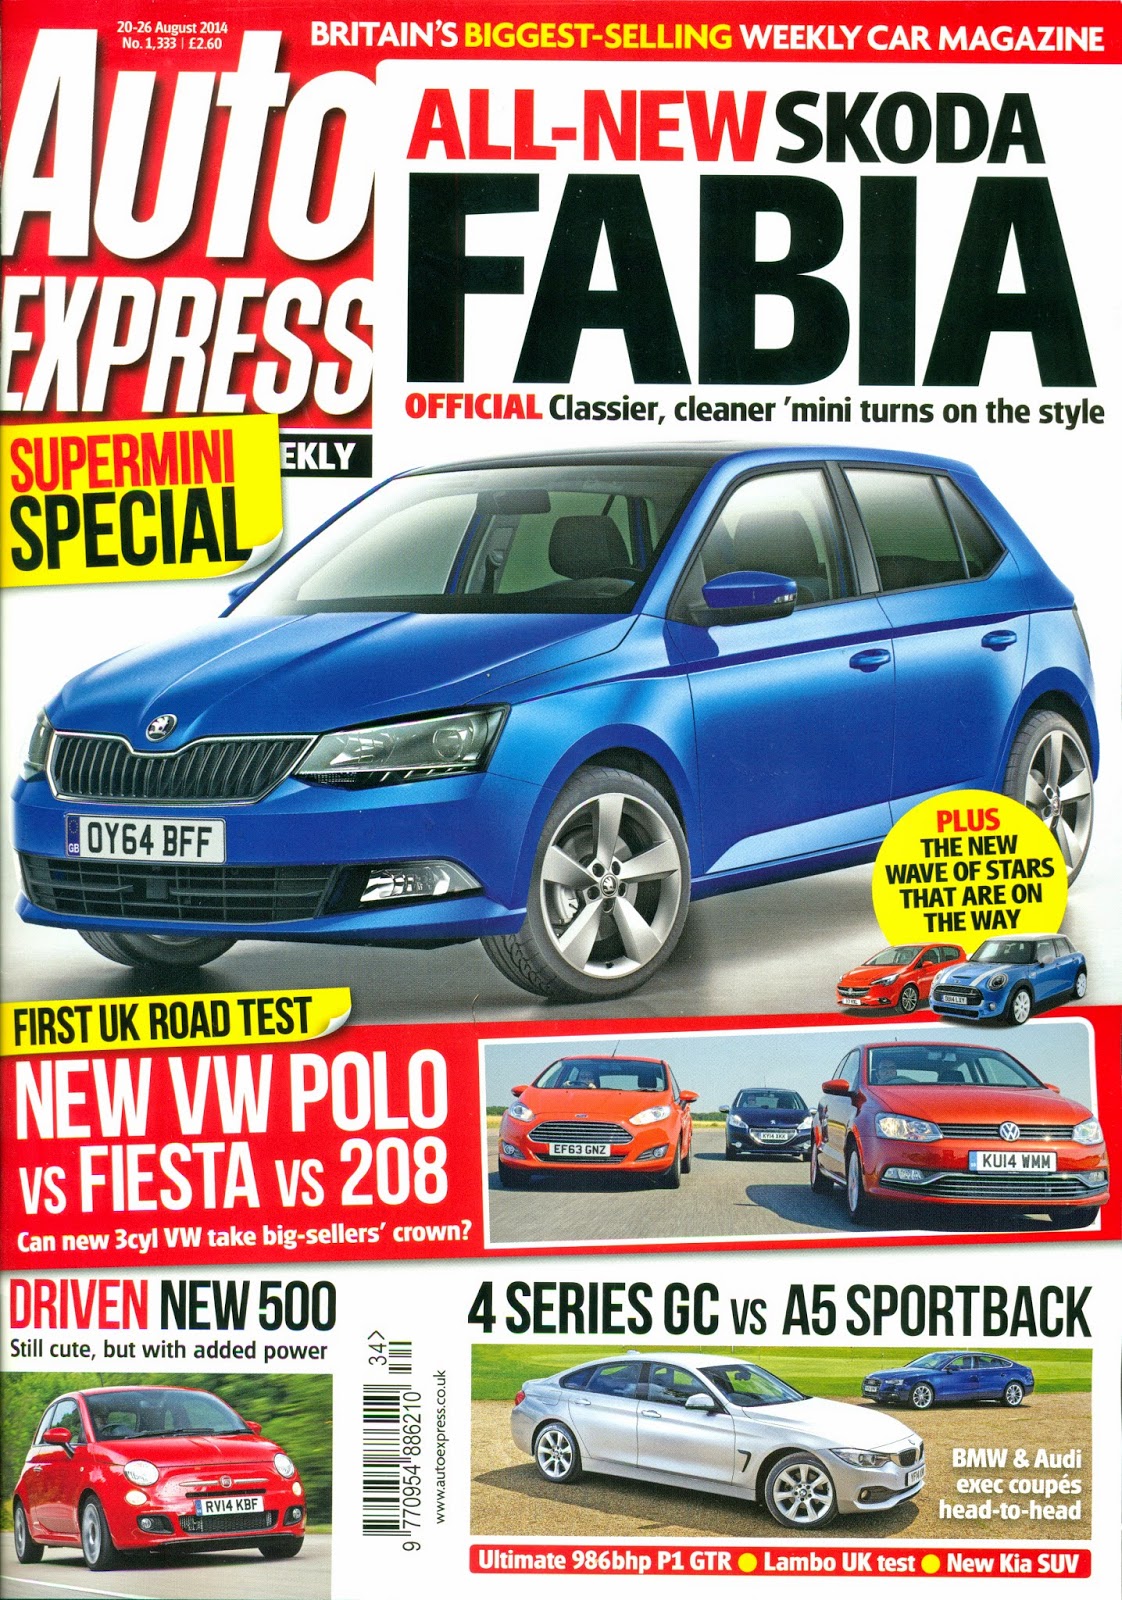 Auto Express Issue No 1,333 20-26 August 2014 Front Cover